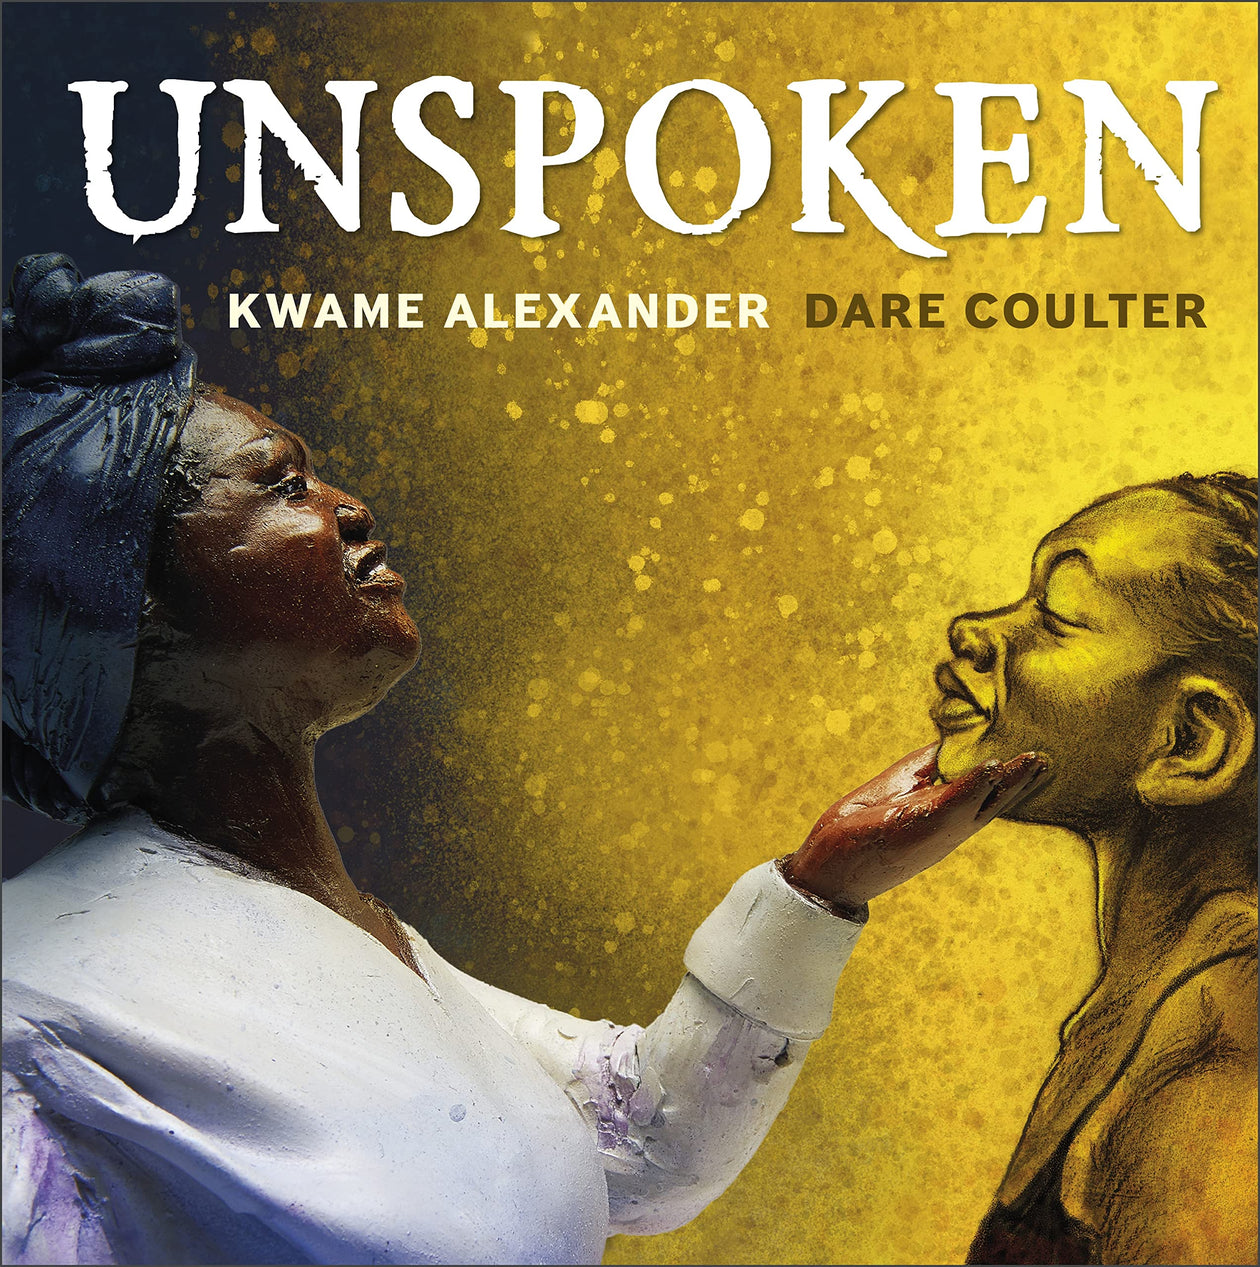 Kwame Alexander: Unspoken, illustrated by Dare Coulter